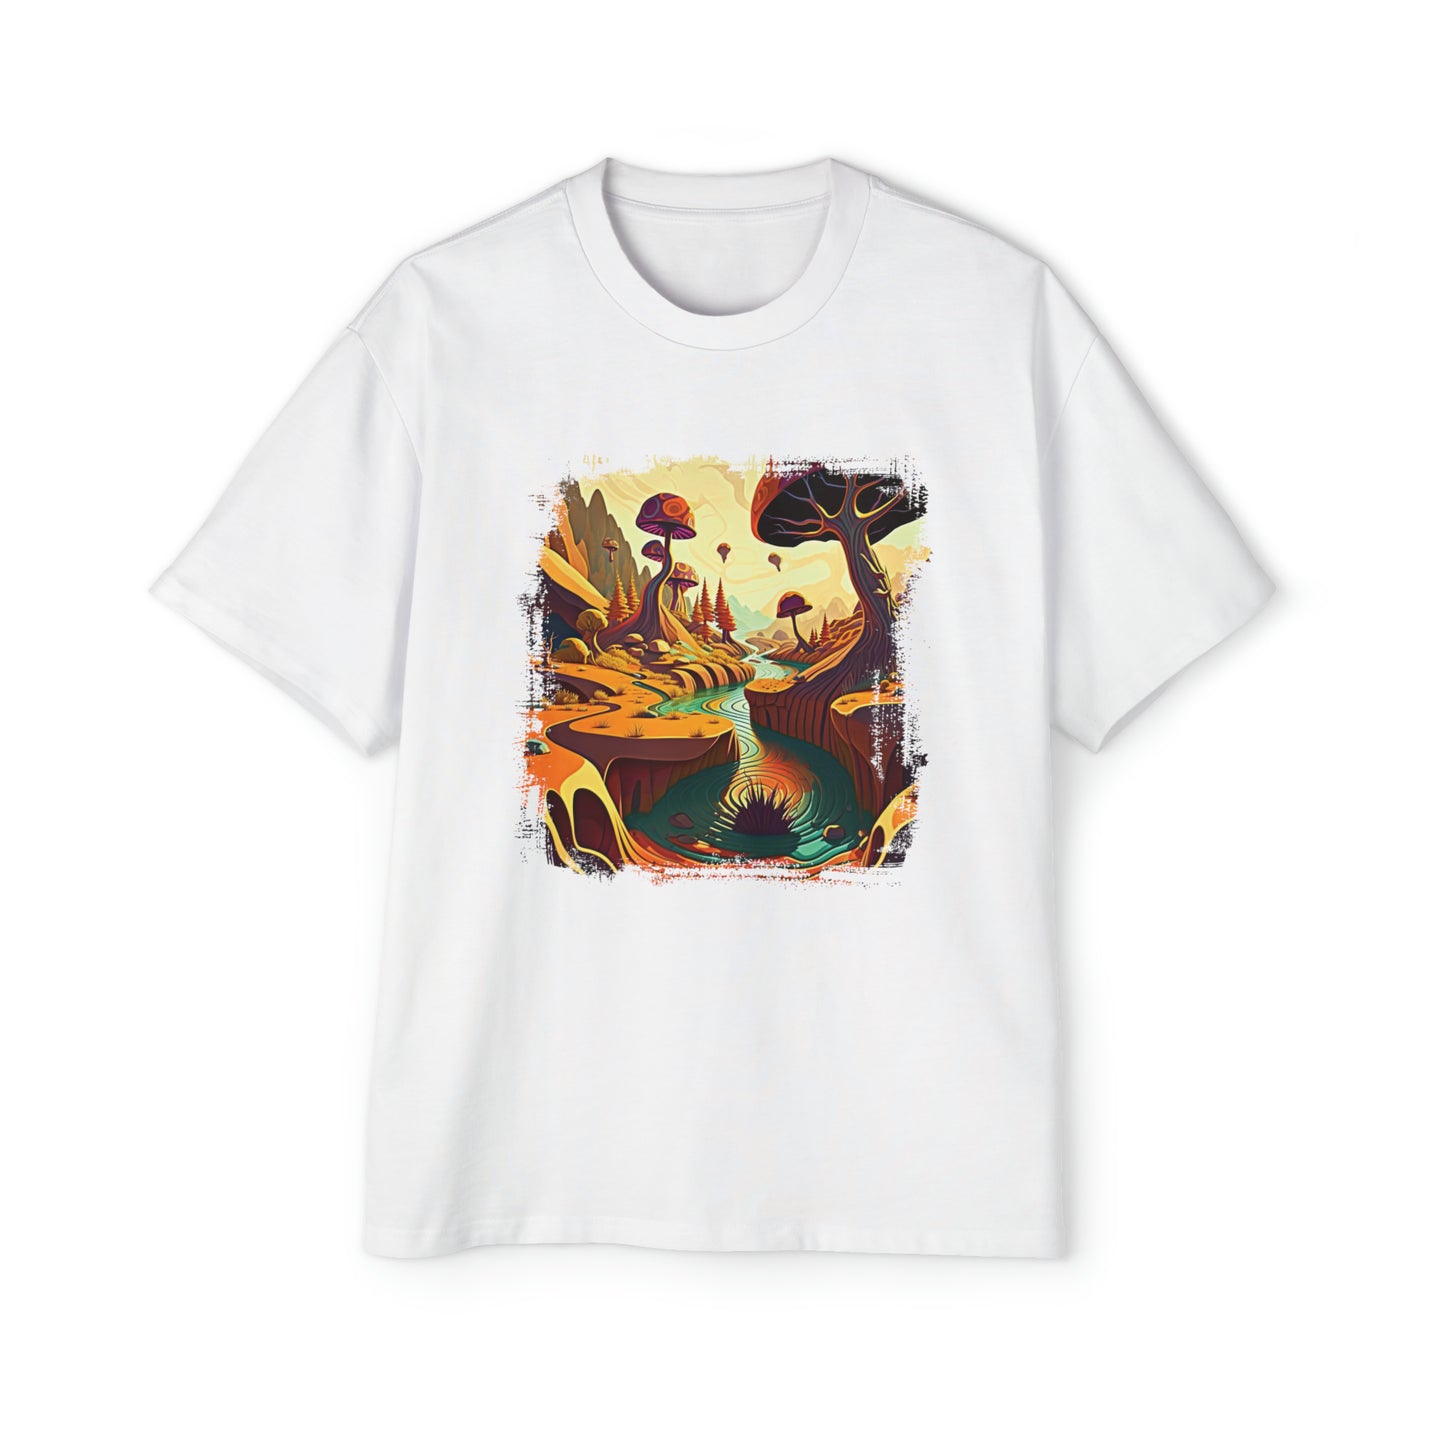 Trippy Adventures: Explore a Psychedelic Mushroom Land on this Oversized T-Shirt